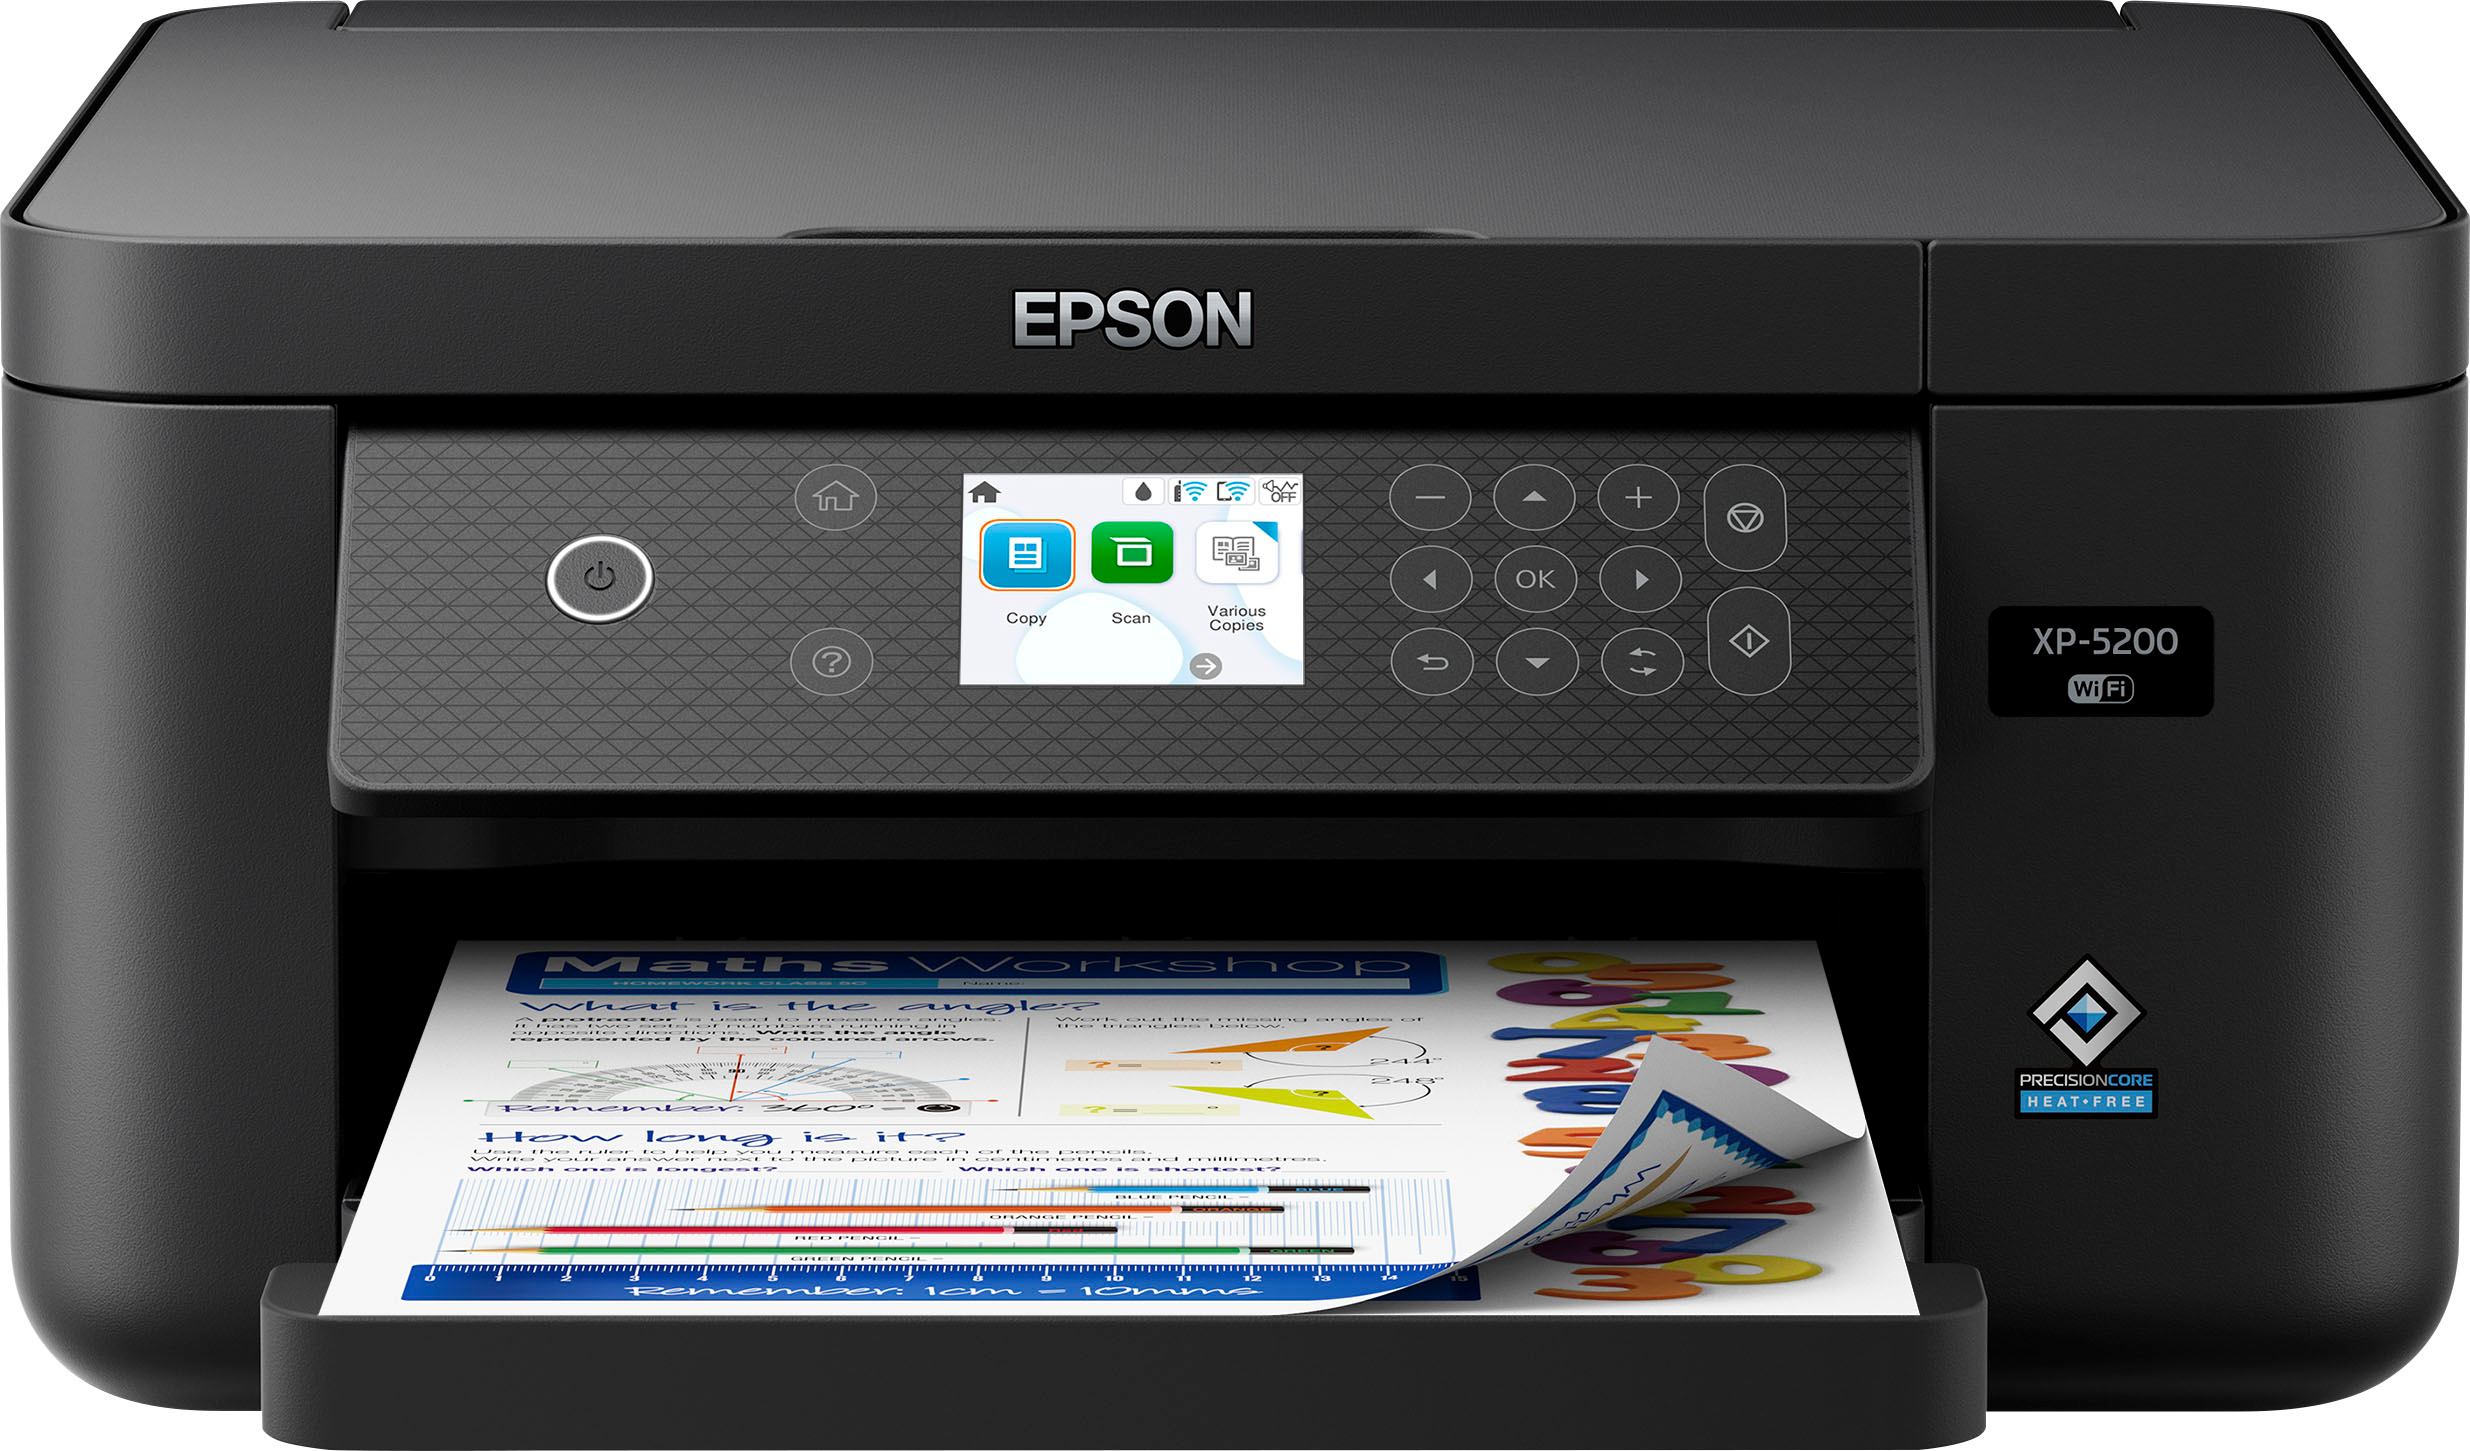 Epson Expression Premium XP-6100 Wireless Color Inkjet Small-In-One Printer